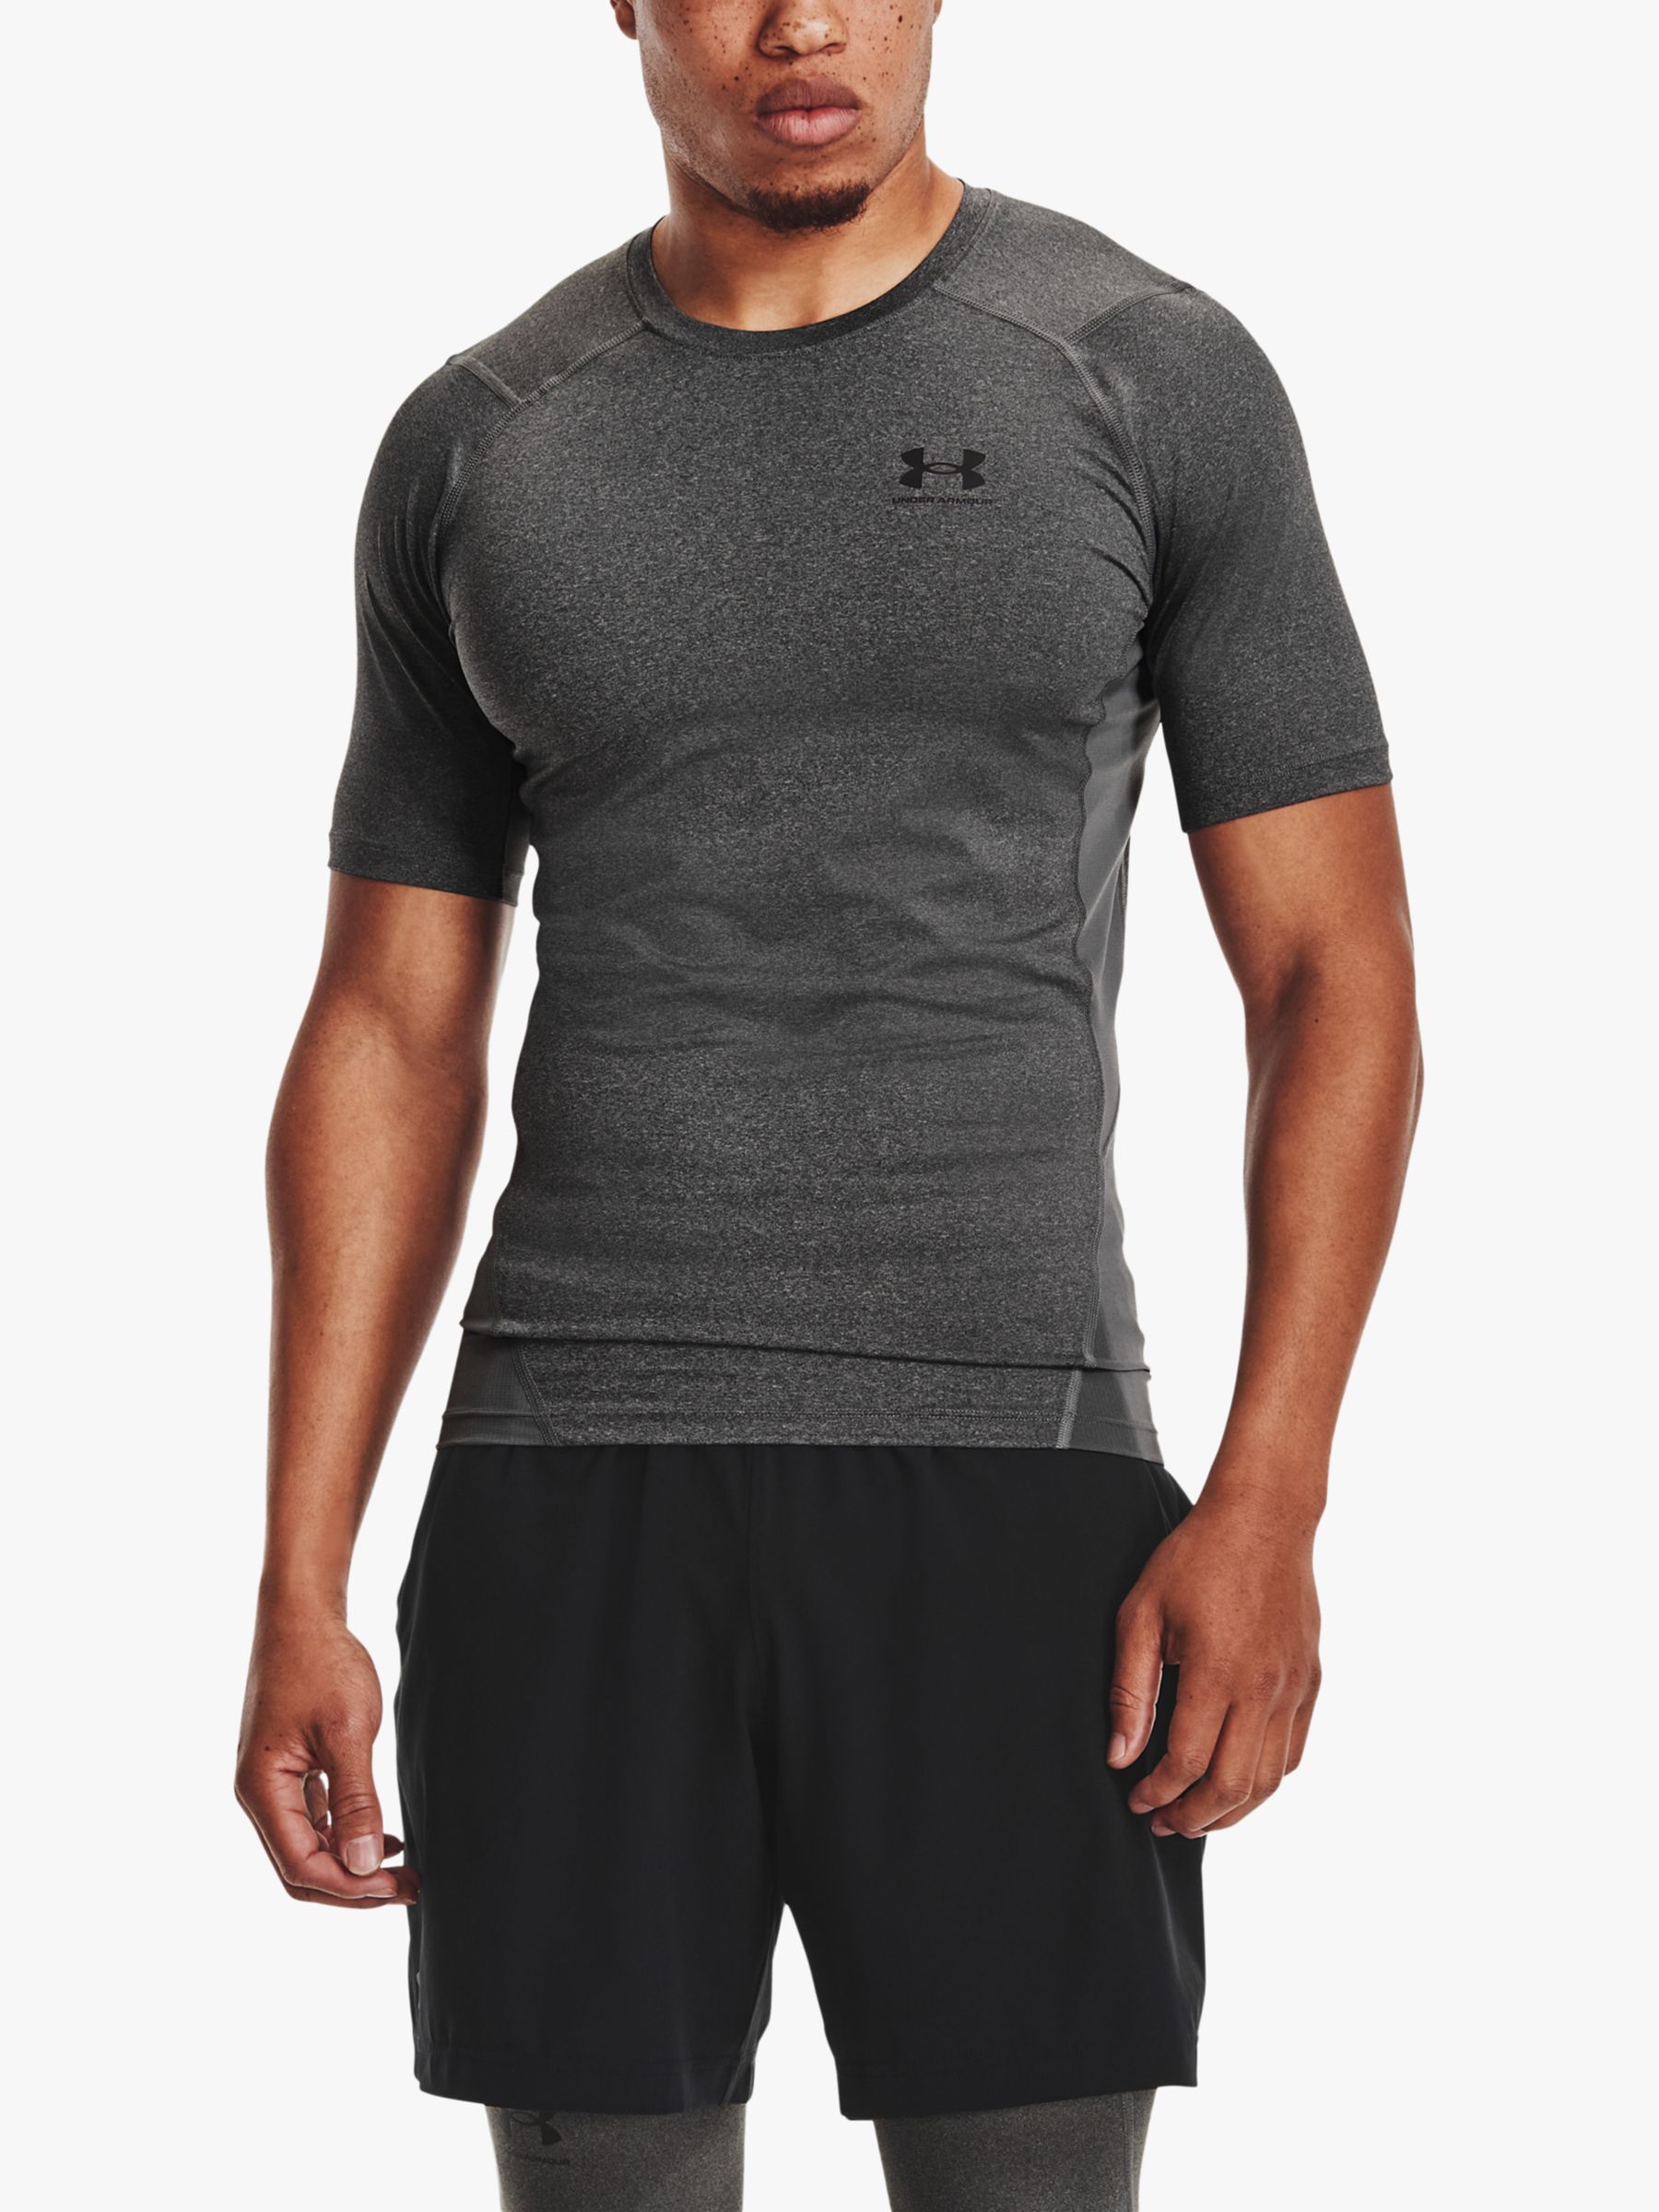 Under Armour CoolSwitch Trail Short Sleeve T-Shirt - Women's